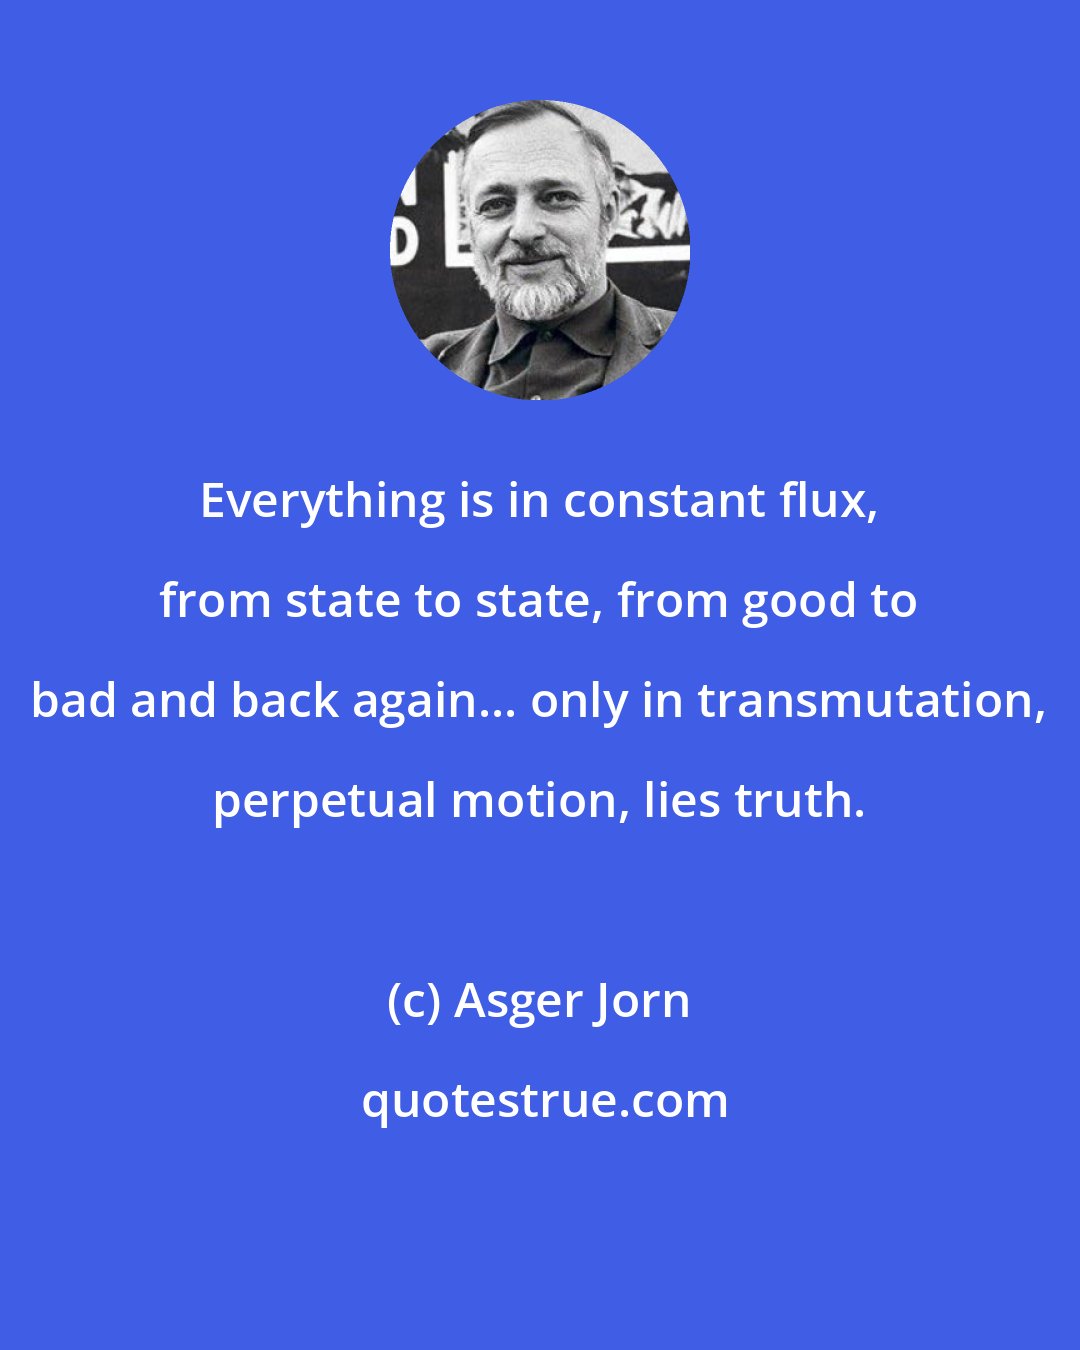 Asger Jorn: Everything is in constant flux, from state to state, from good to bad and back again... only in transmutation, perpetual motion, lies truth.